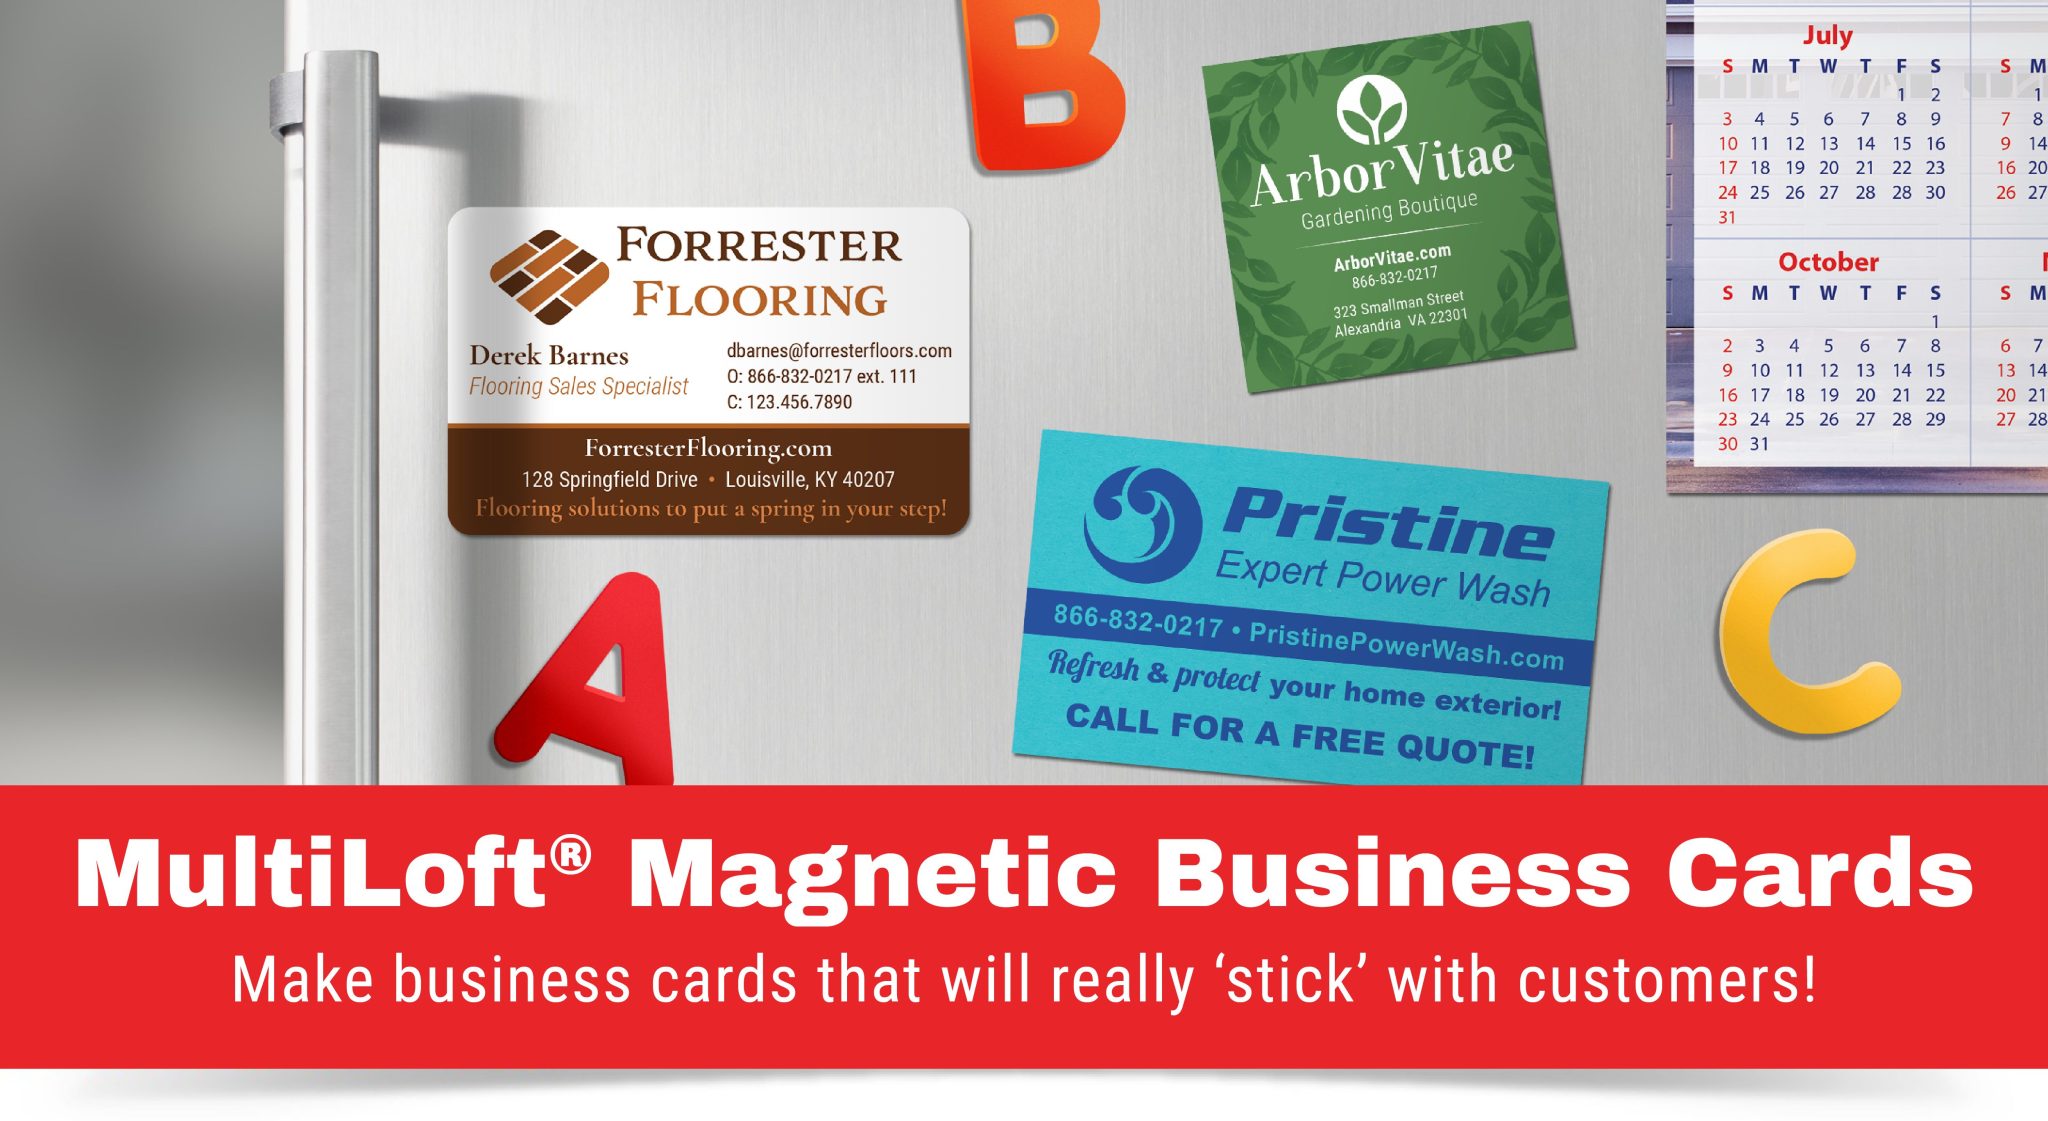 Magnetic Business Cards With Multiloft® Convertible Solutions